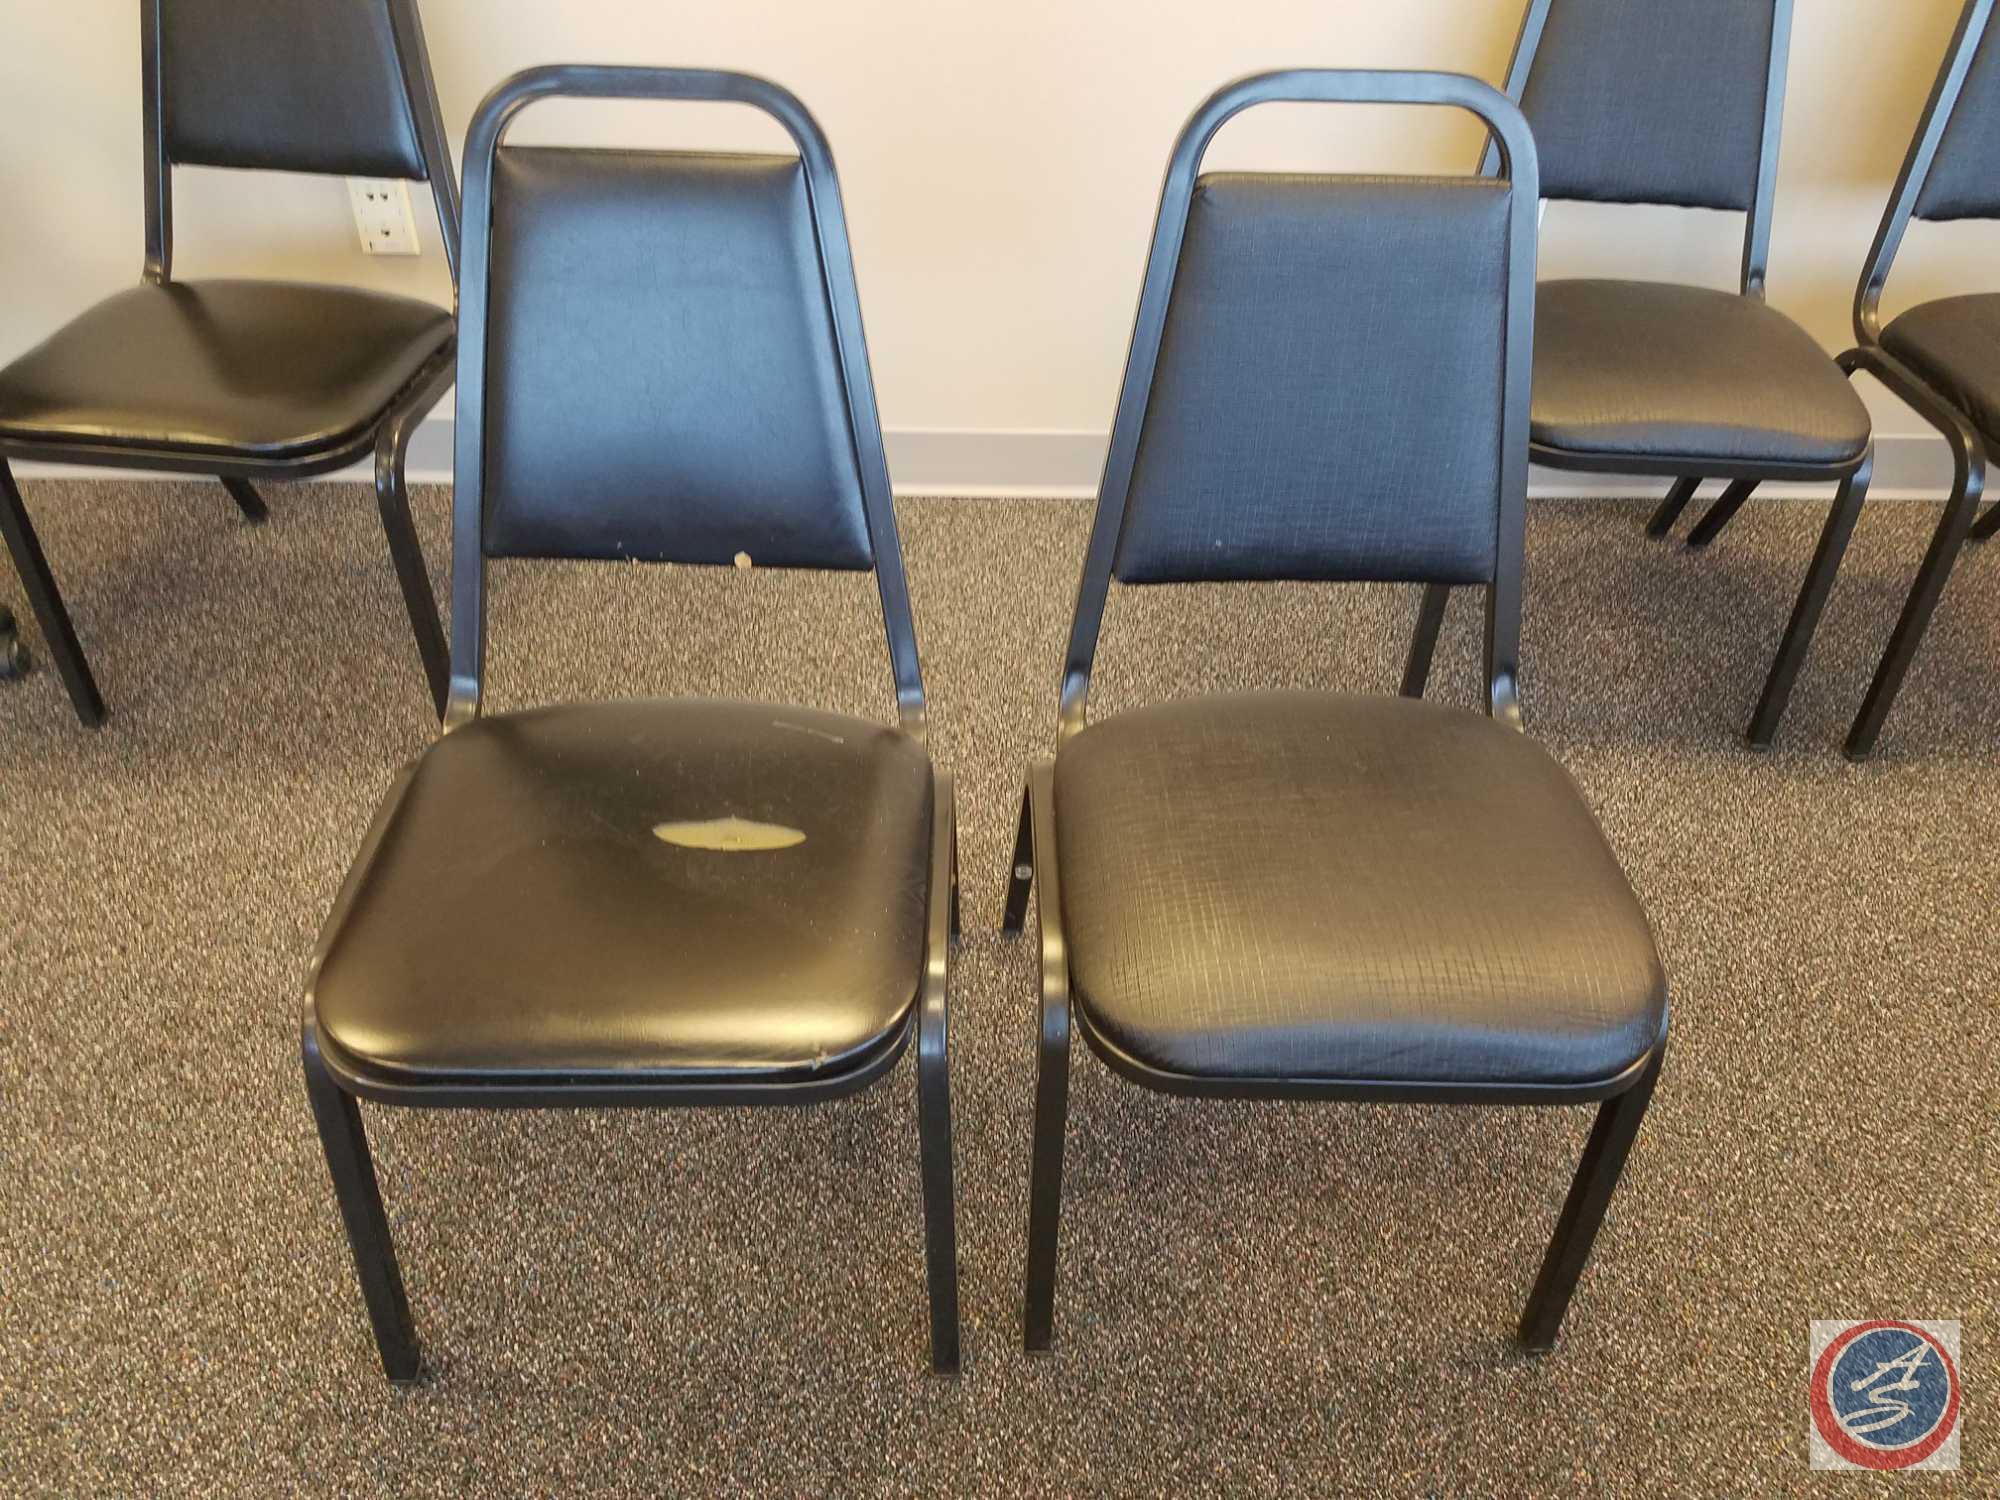 (6) Virco Chairs Measuring and HON Adjustable Rolling Office Chair [DAMAGE TO ONE OF THE VIRCO